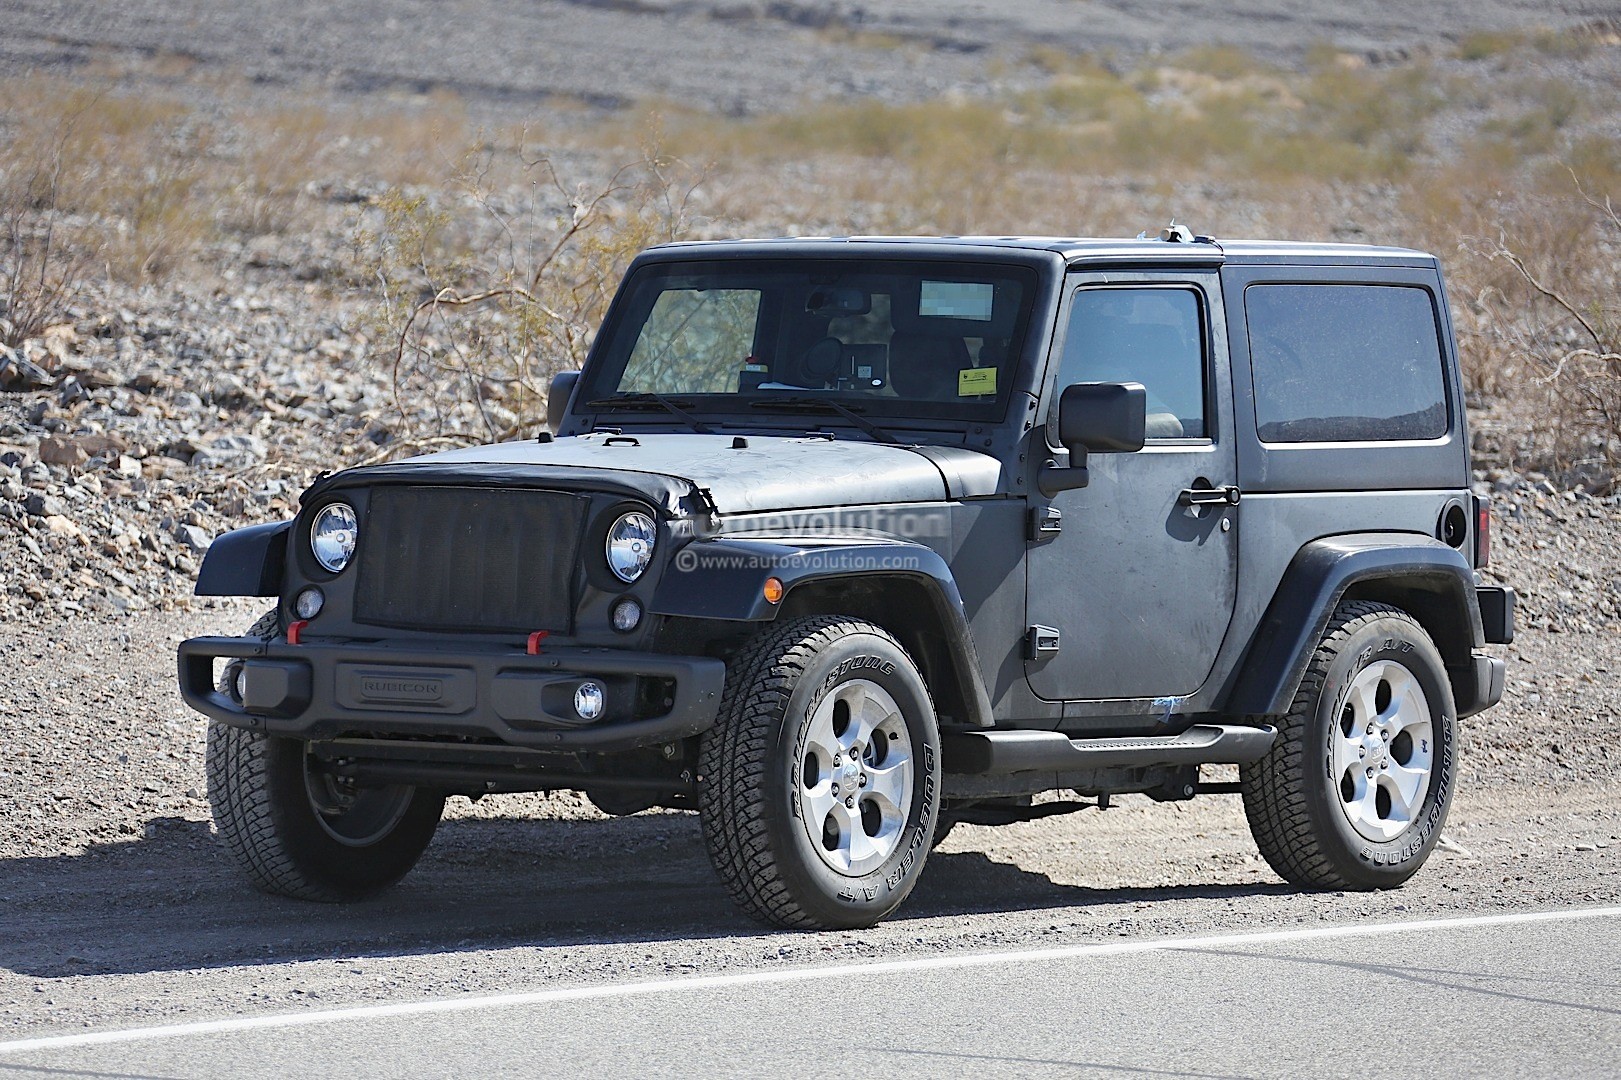 2018 Jeep Wrangler (JL) With Six-Speed Manual Transmission ...